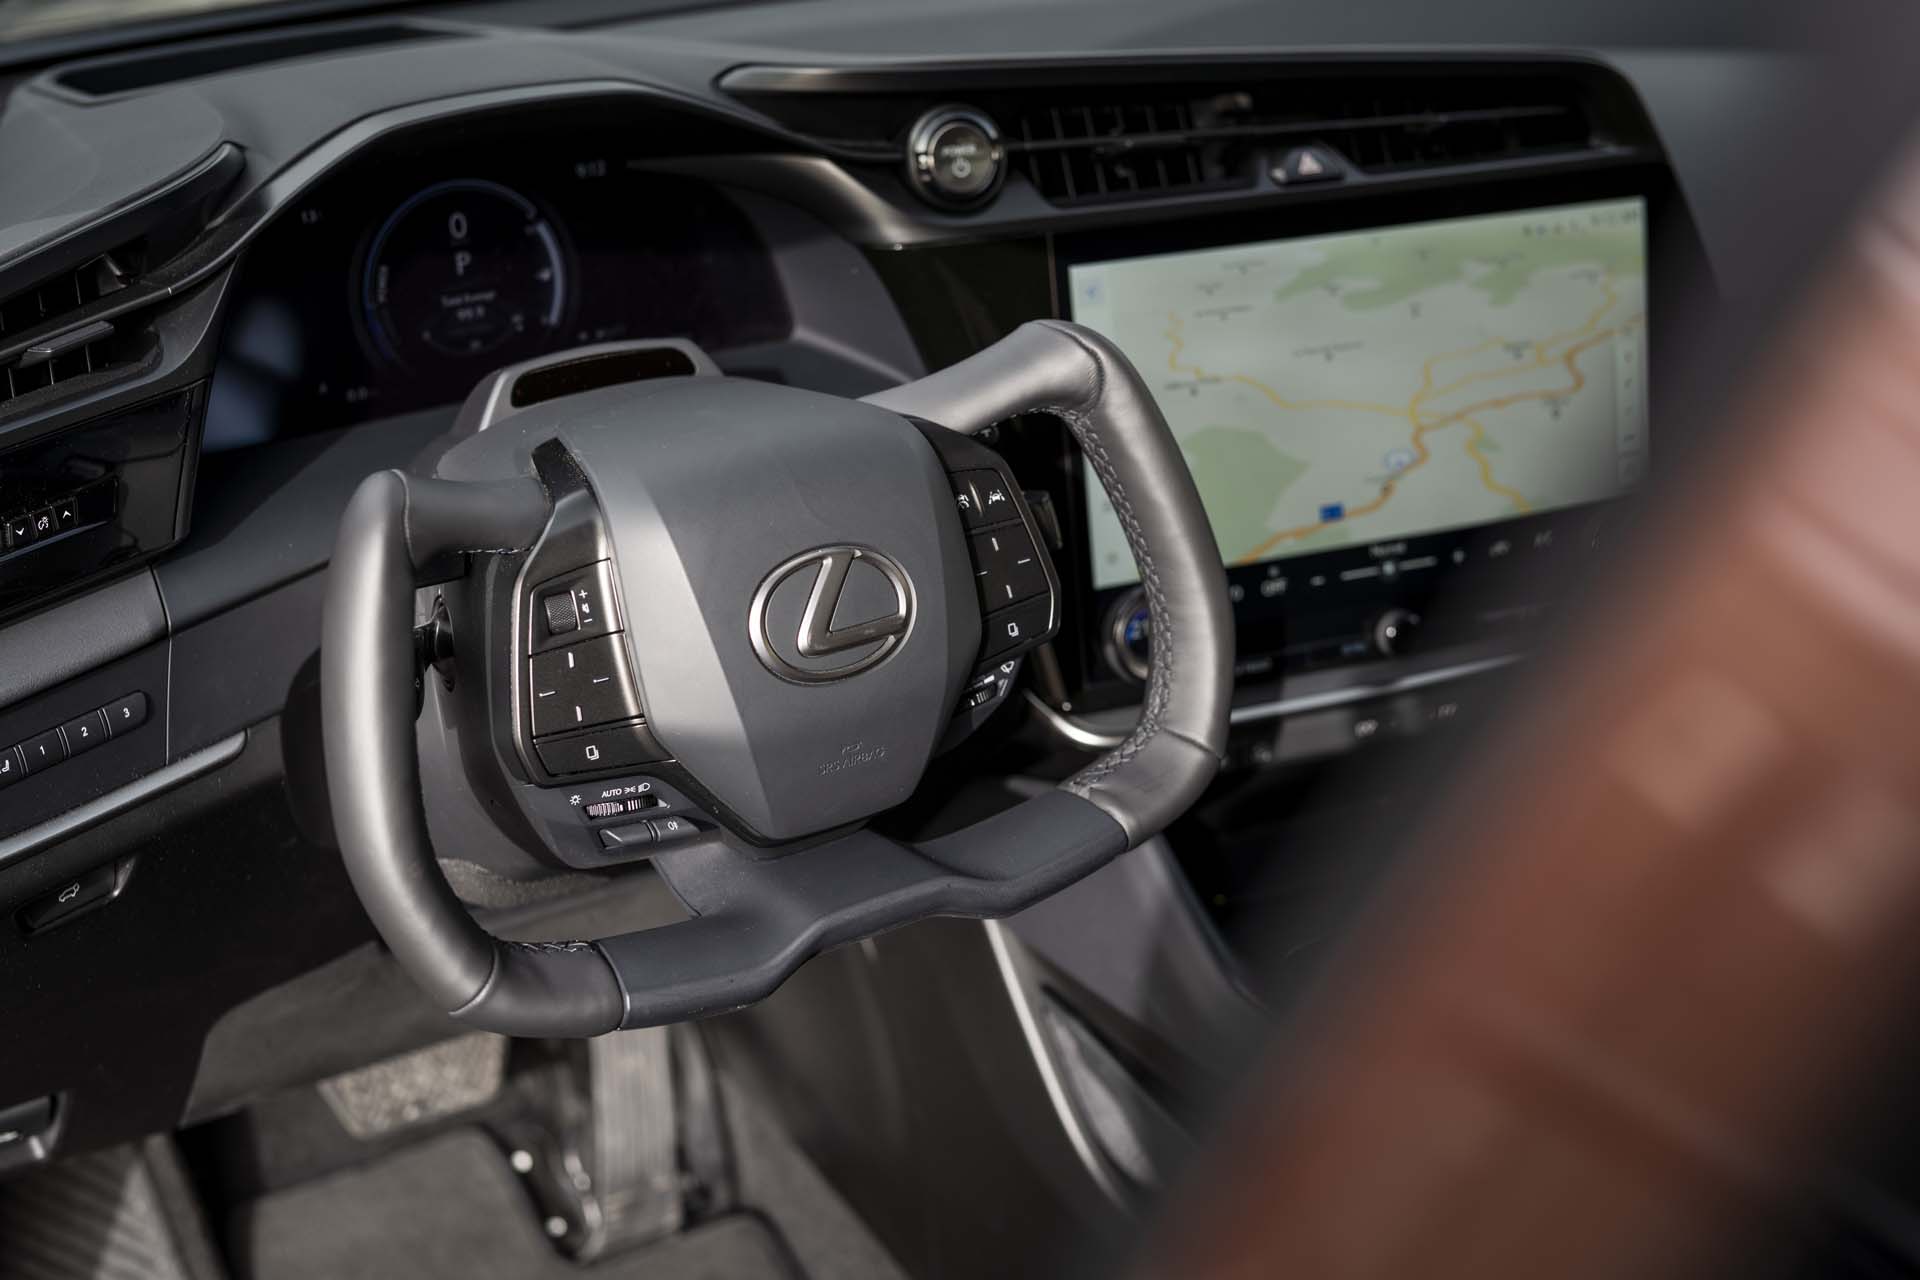 Lexus’ yoke and steer-by-wire system paves the way to the future